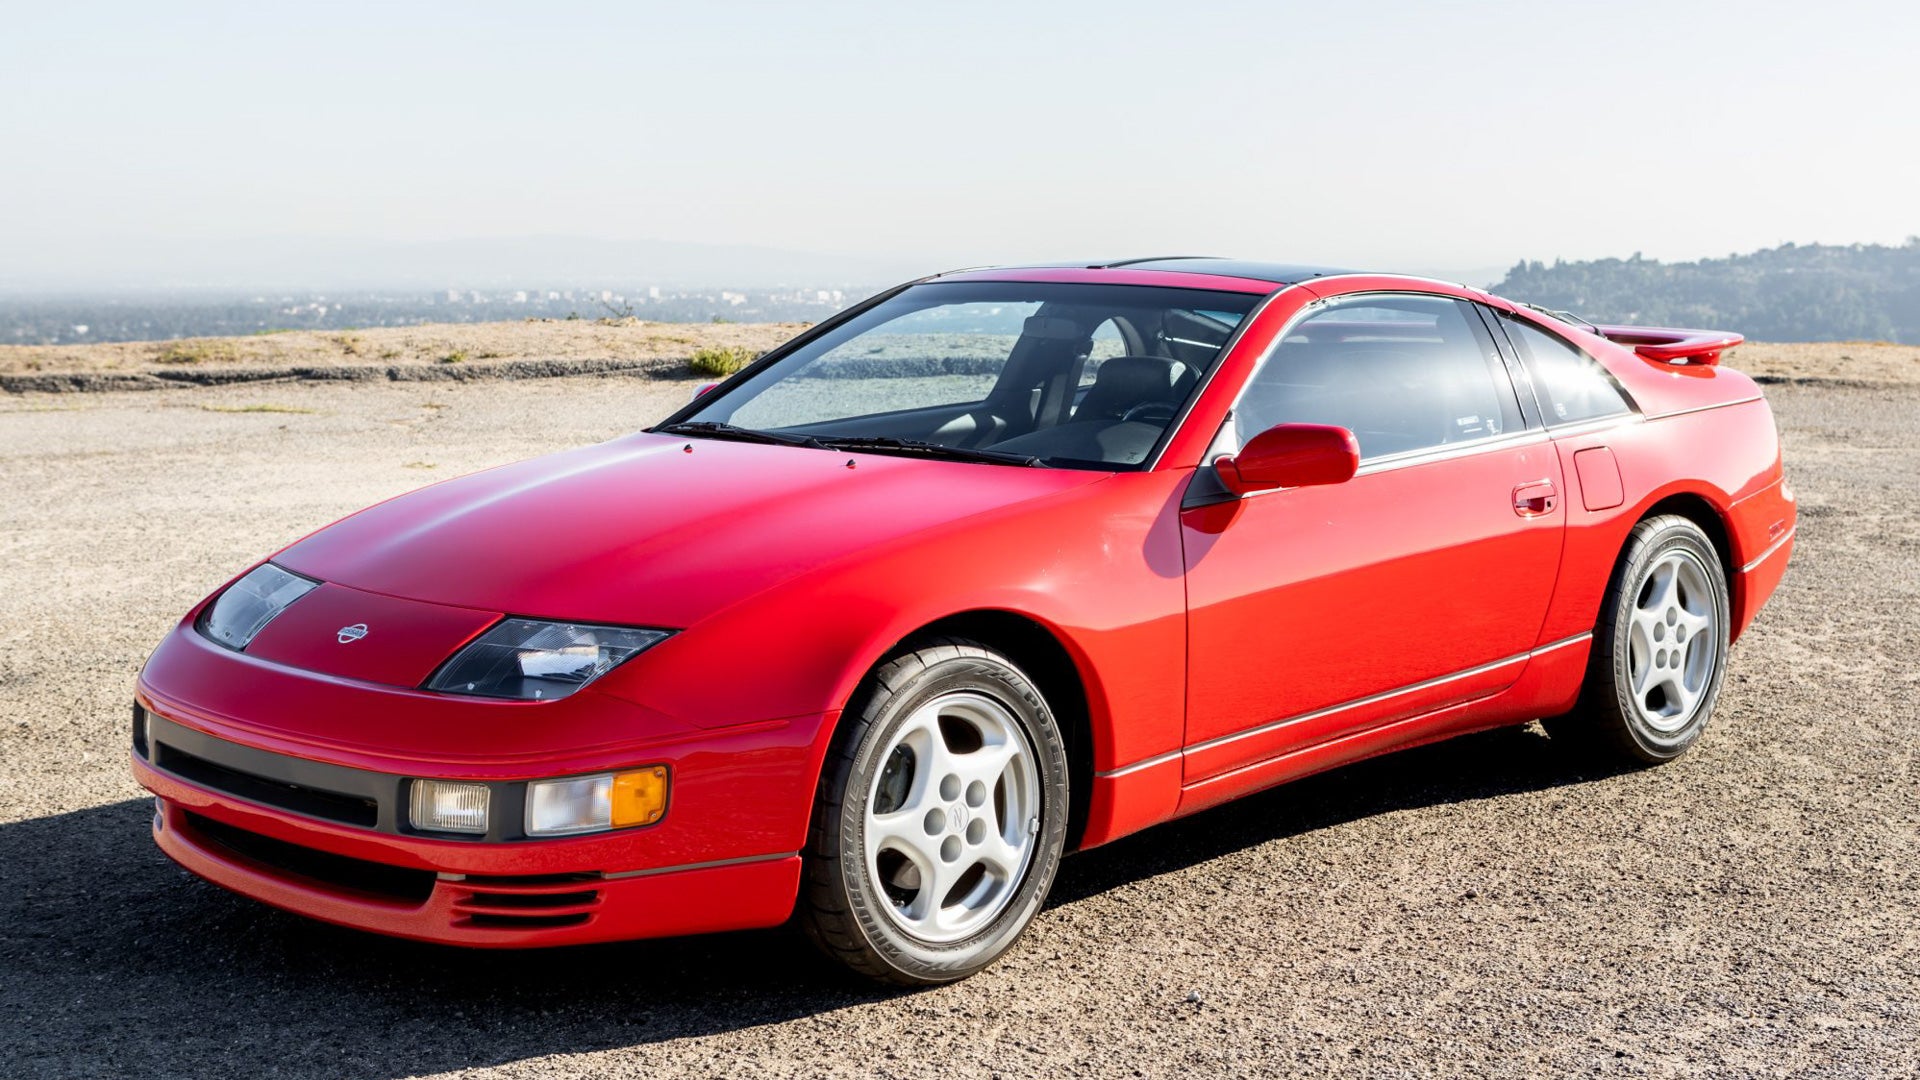 1994 Nissan 300ZX Sells for $135,000 and It Might Be the Most 